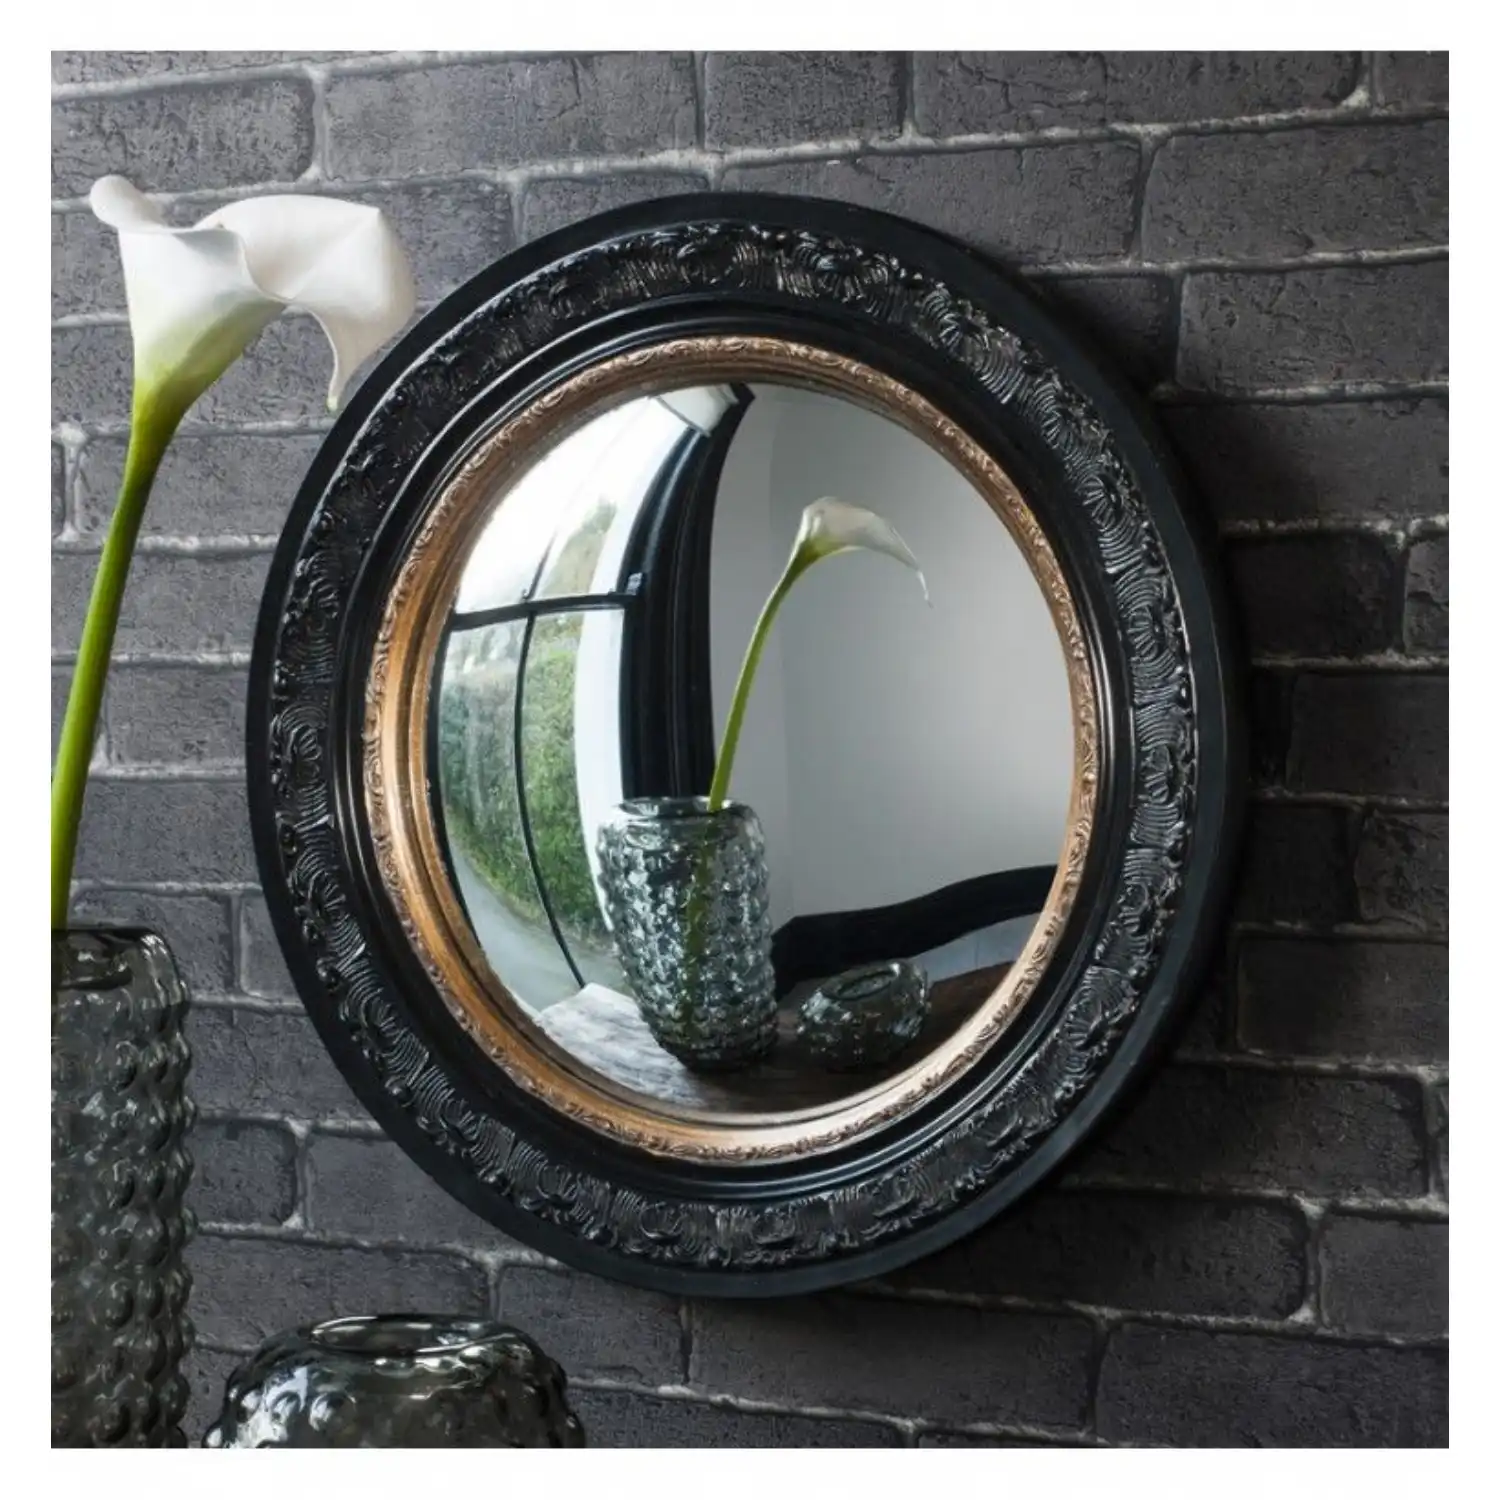 Industrial Round Black And Inner Gold Convex Glass Porthole Wall Mirror 51cm Diameter